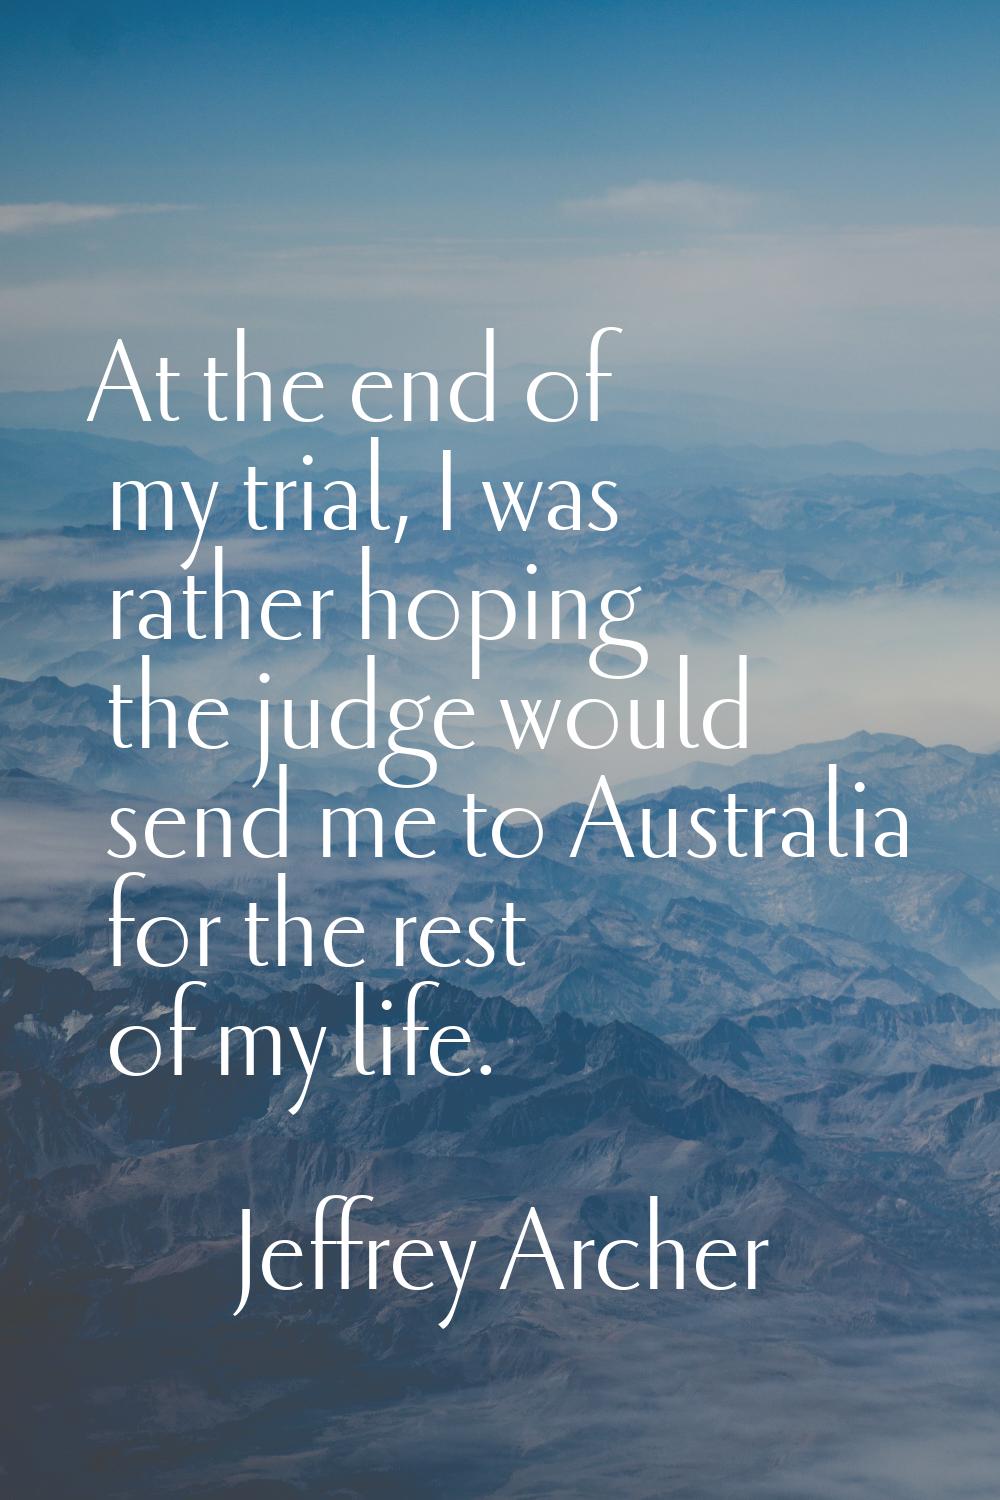 At the end of my trial, I was rather hoping the judge would send me to Australia for the rest of my